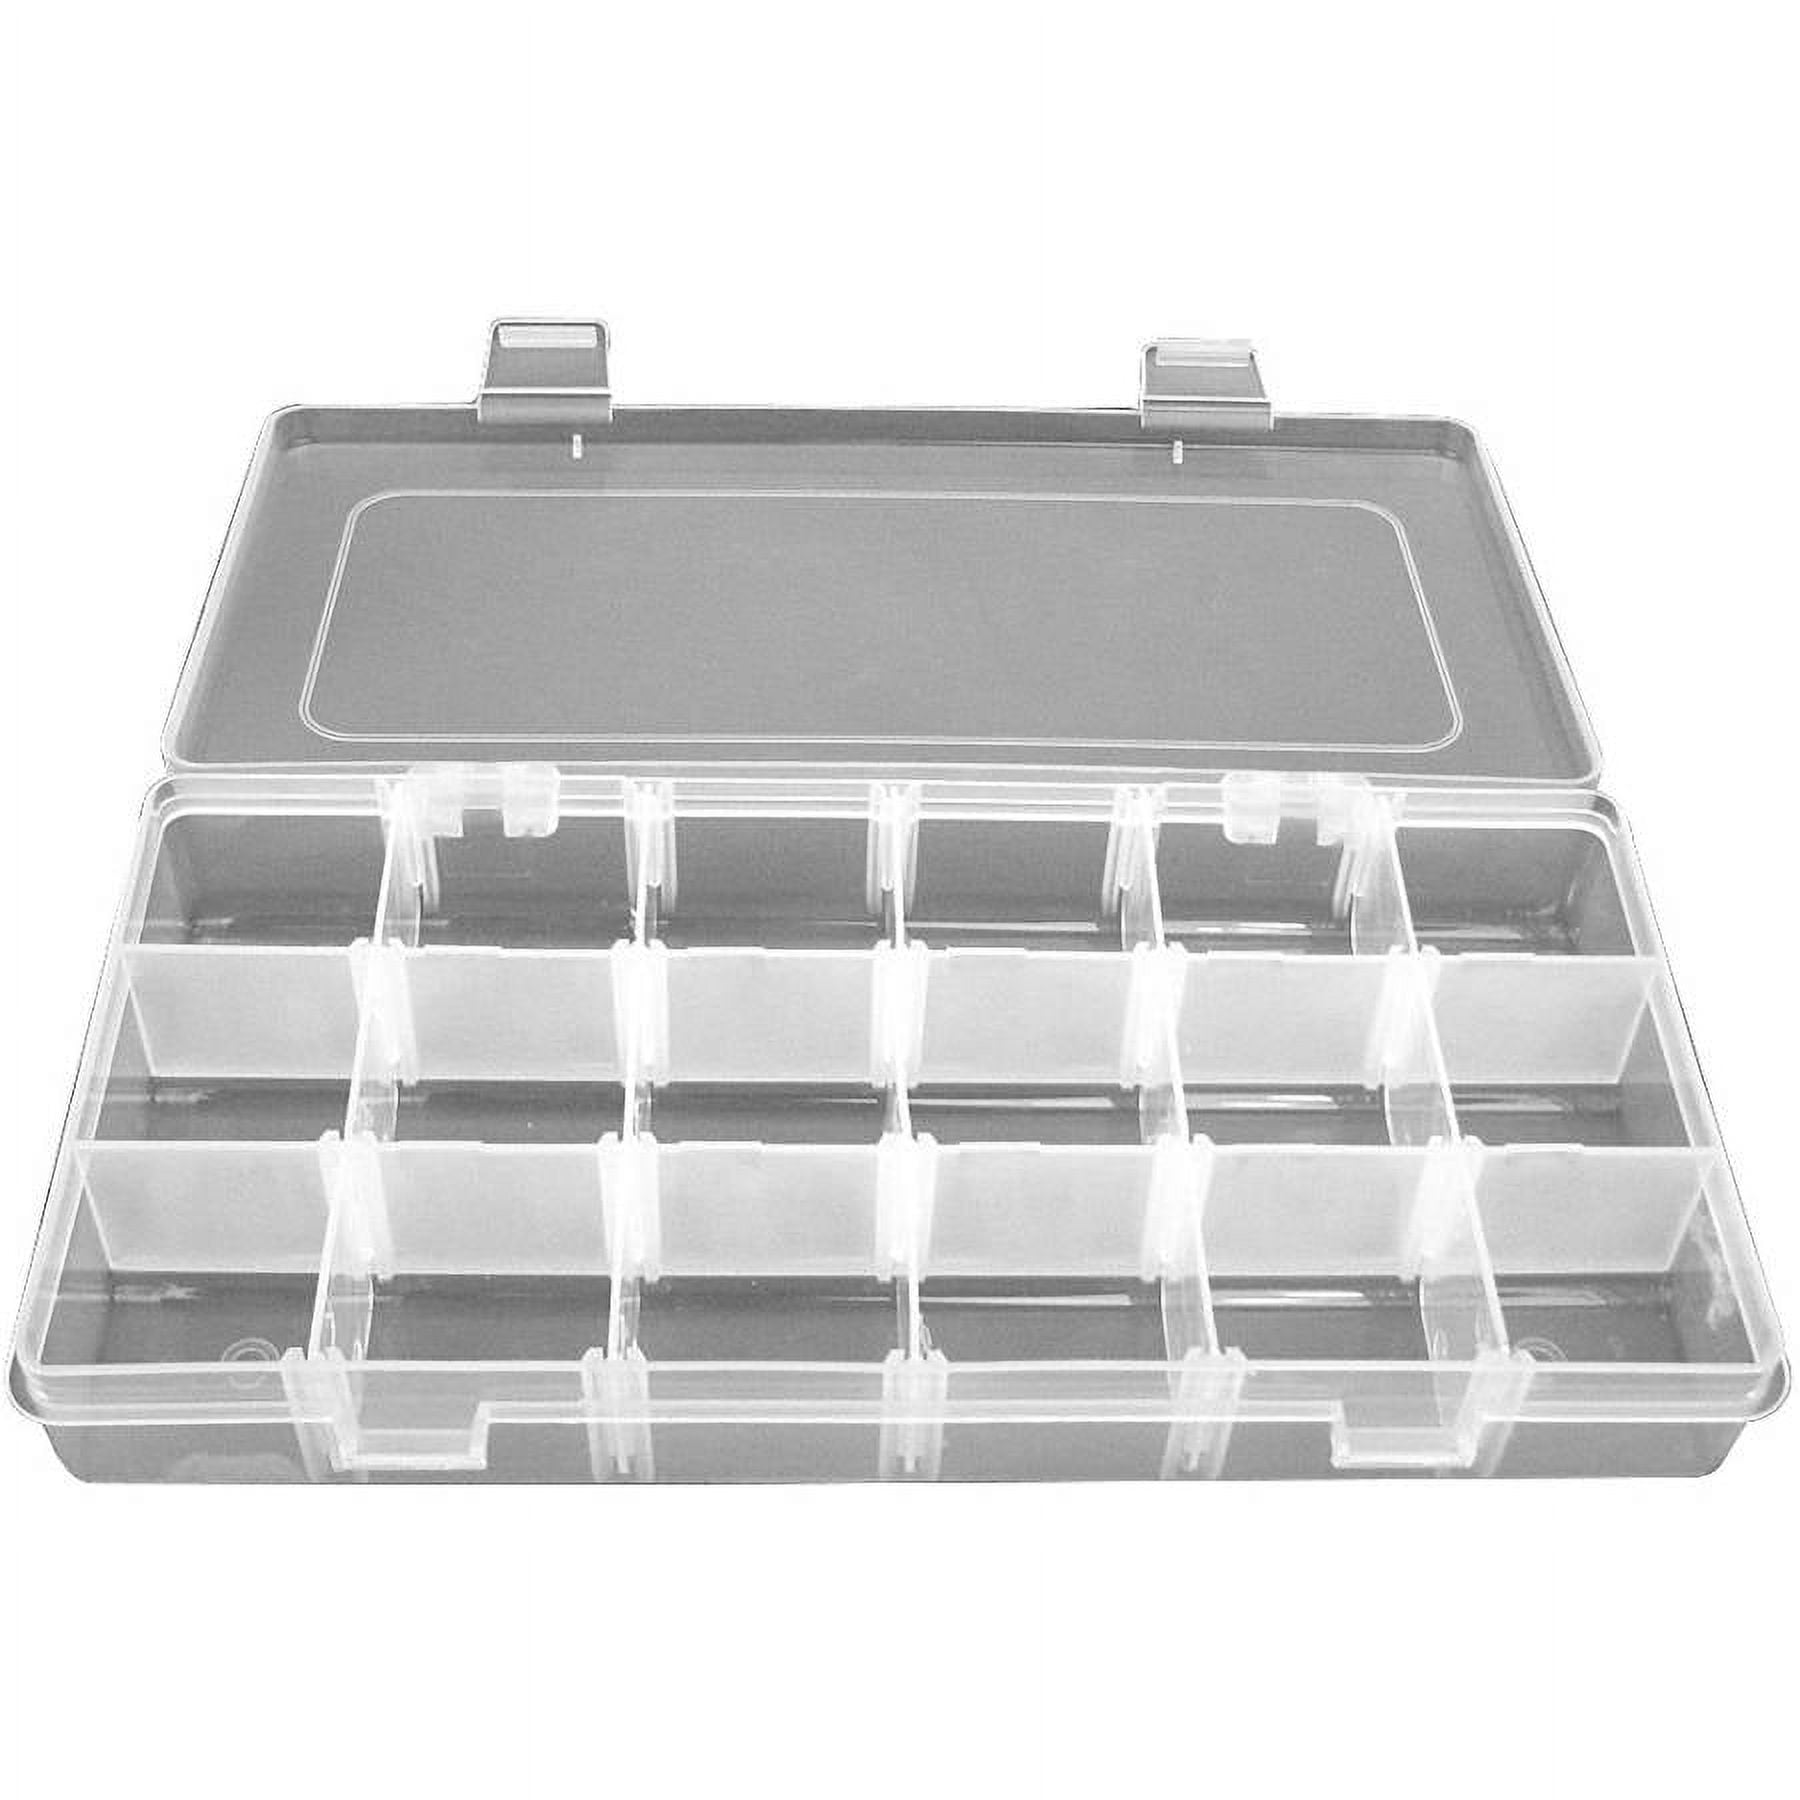 Box Plastic Durable Tool 73-Compartment Storage Stalwart